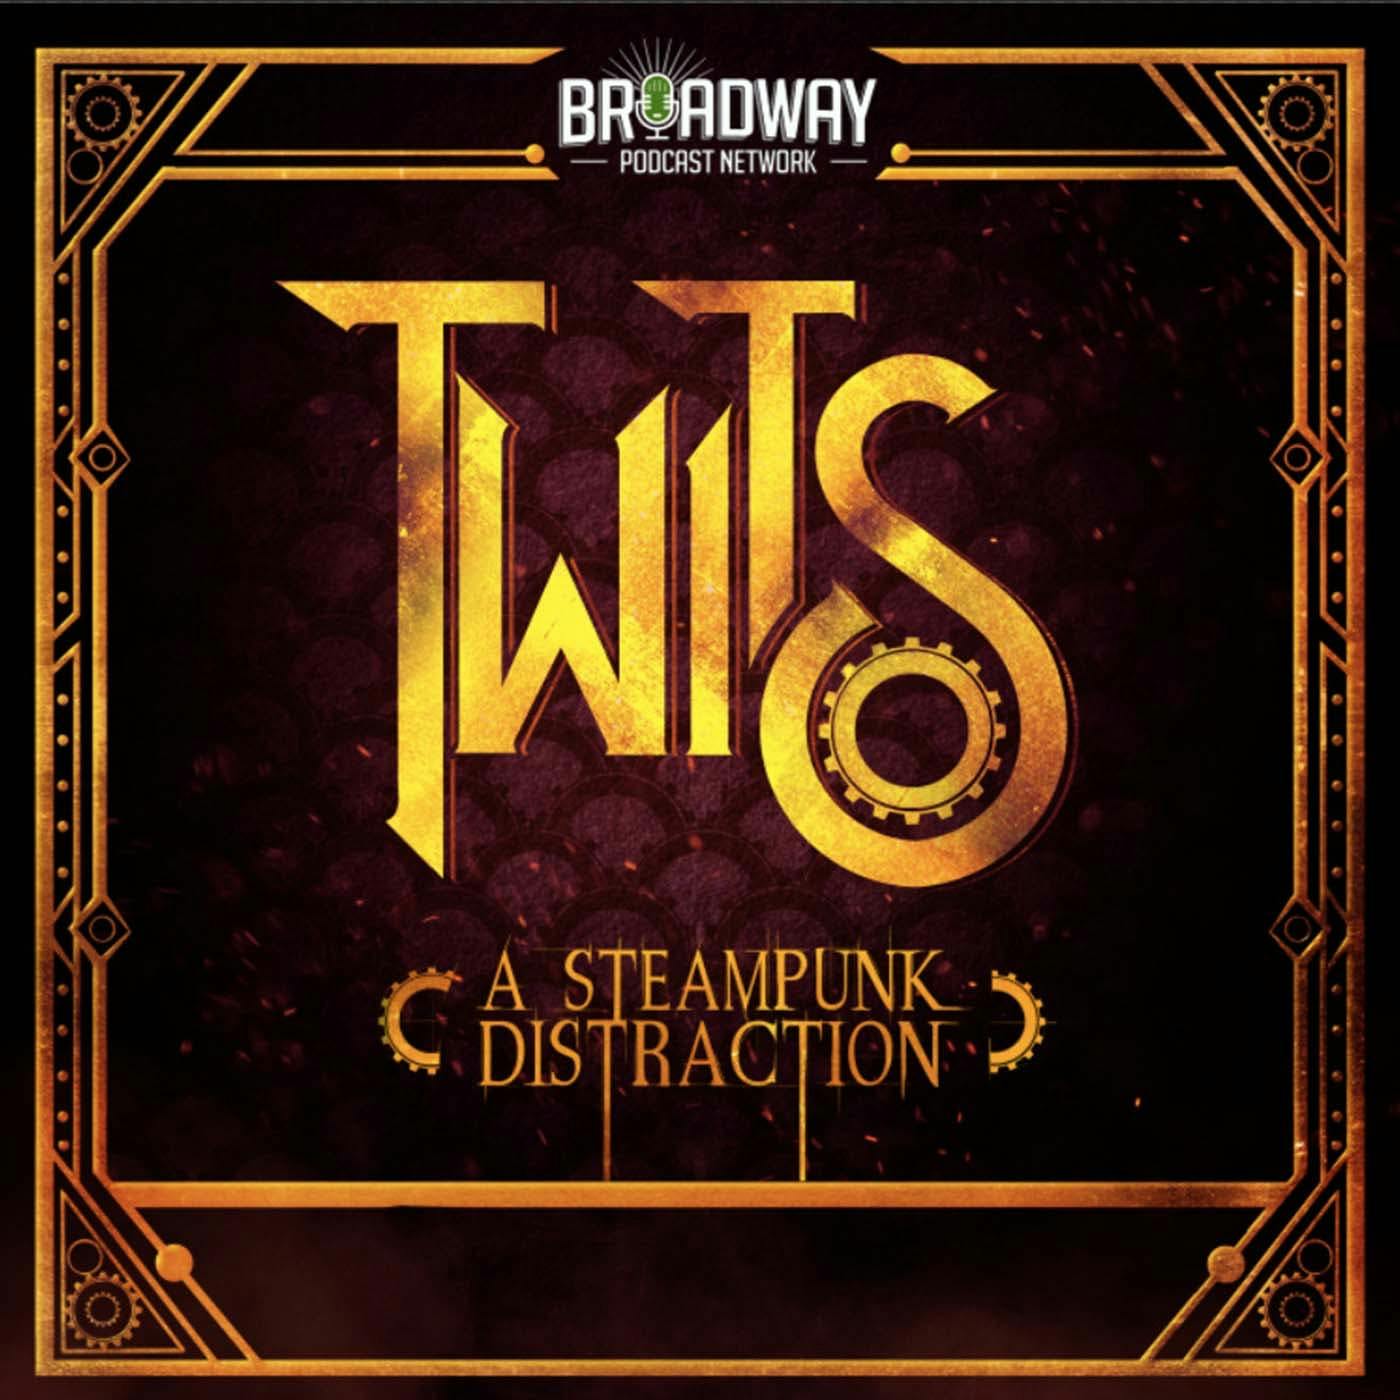 Twits, A Steampunk Distraction